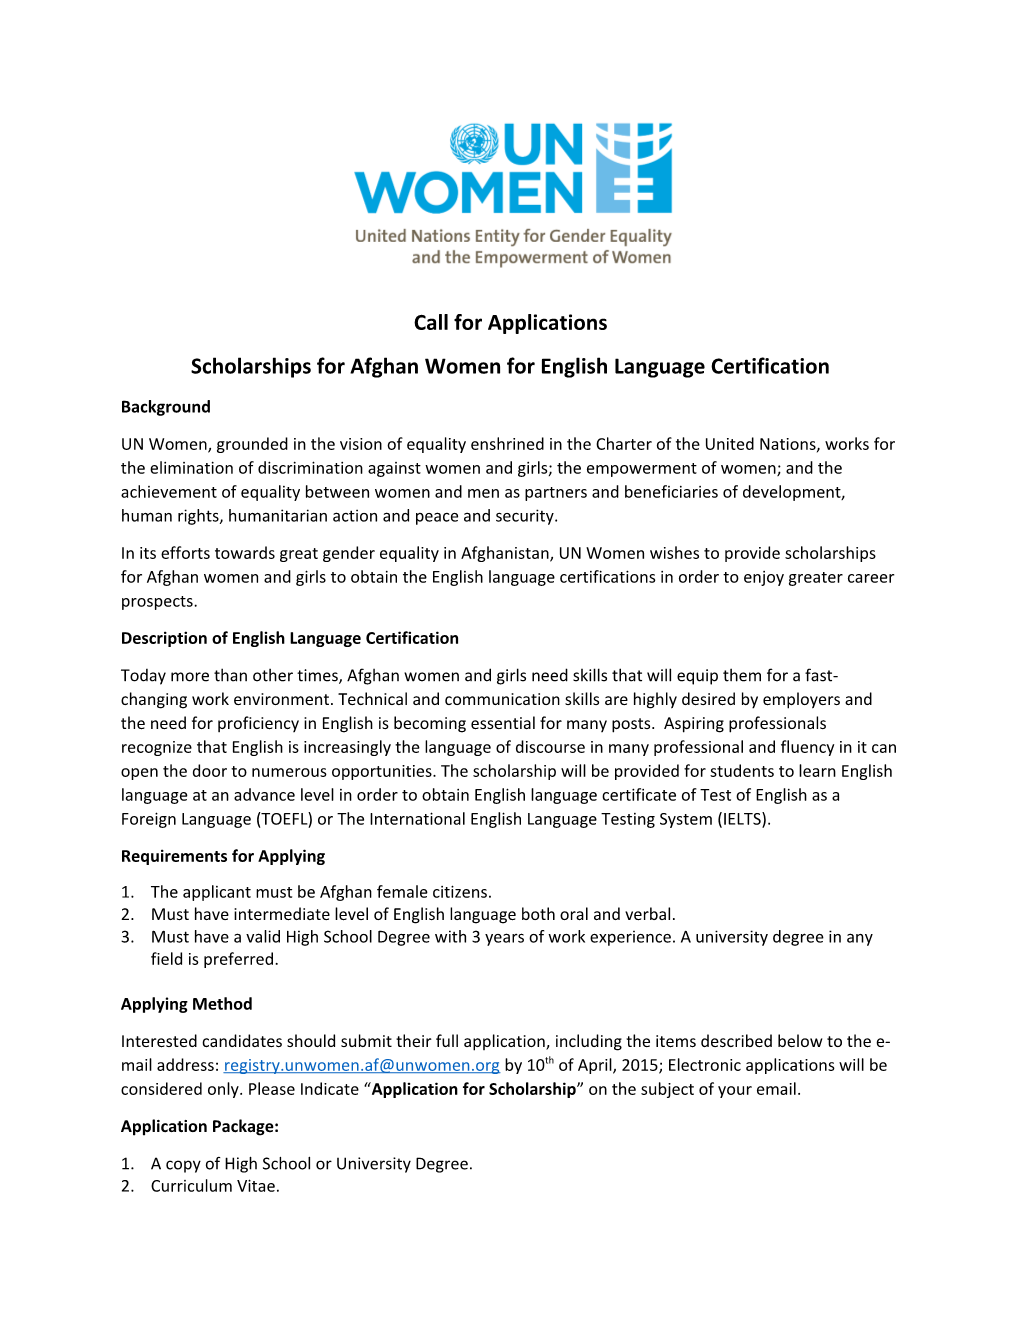 Scholarships for Afghan Women for English Language Certification